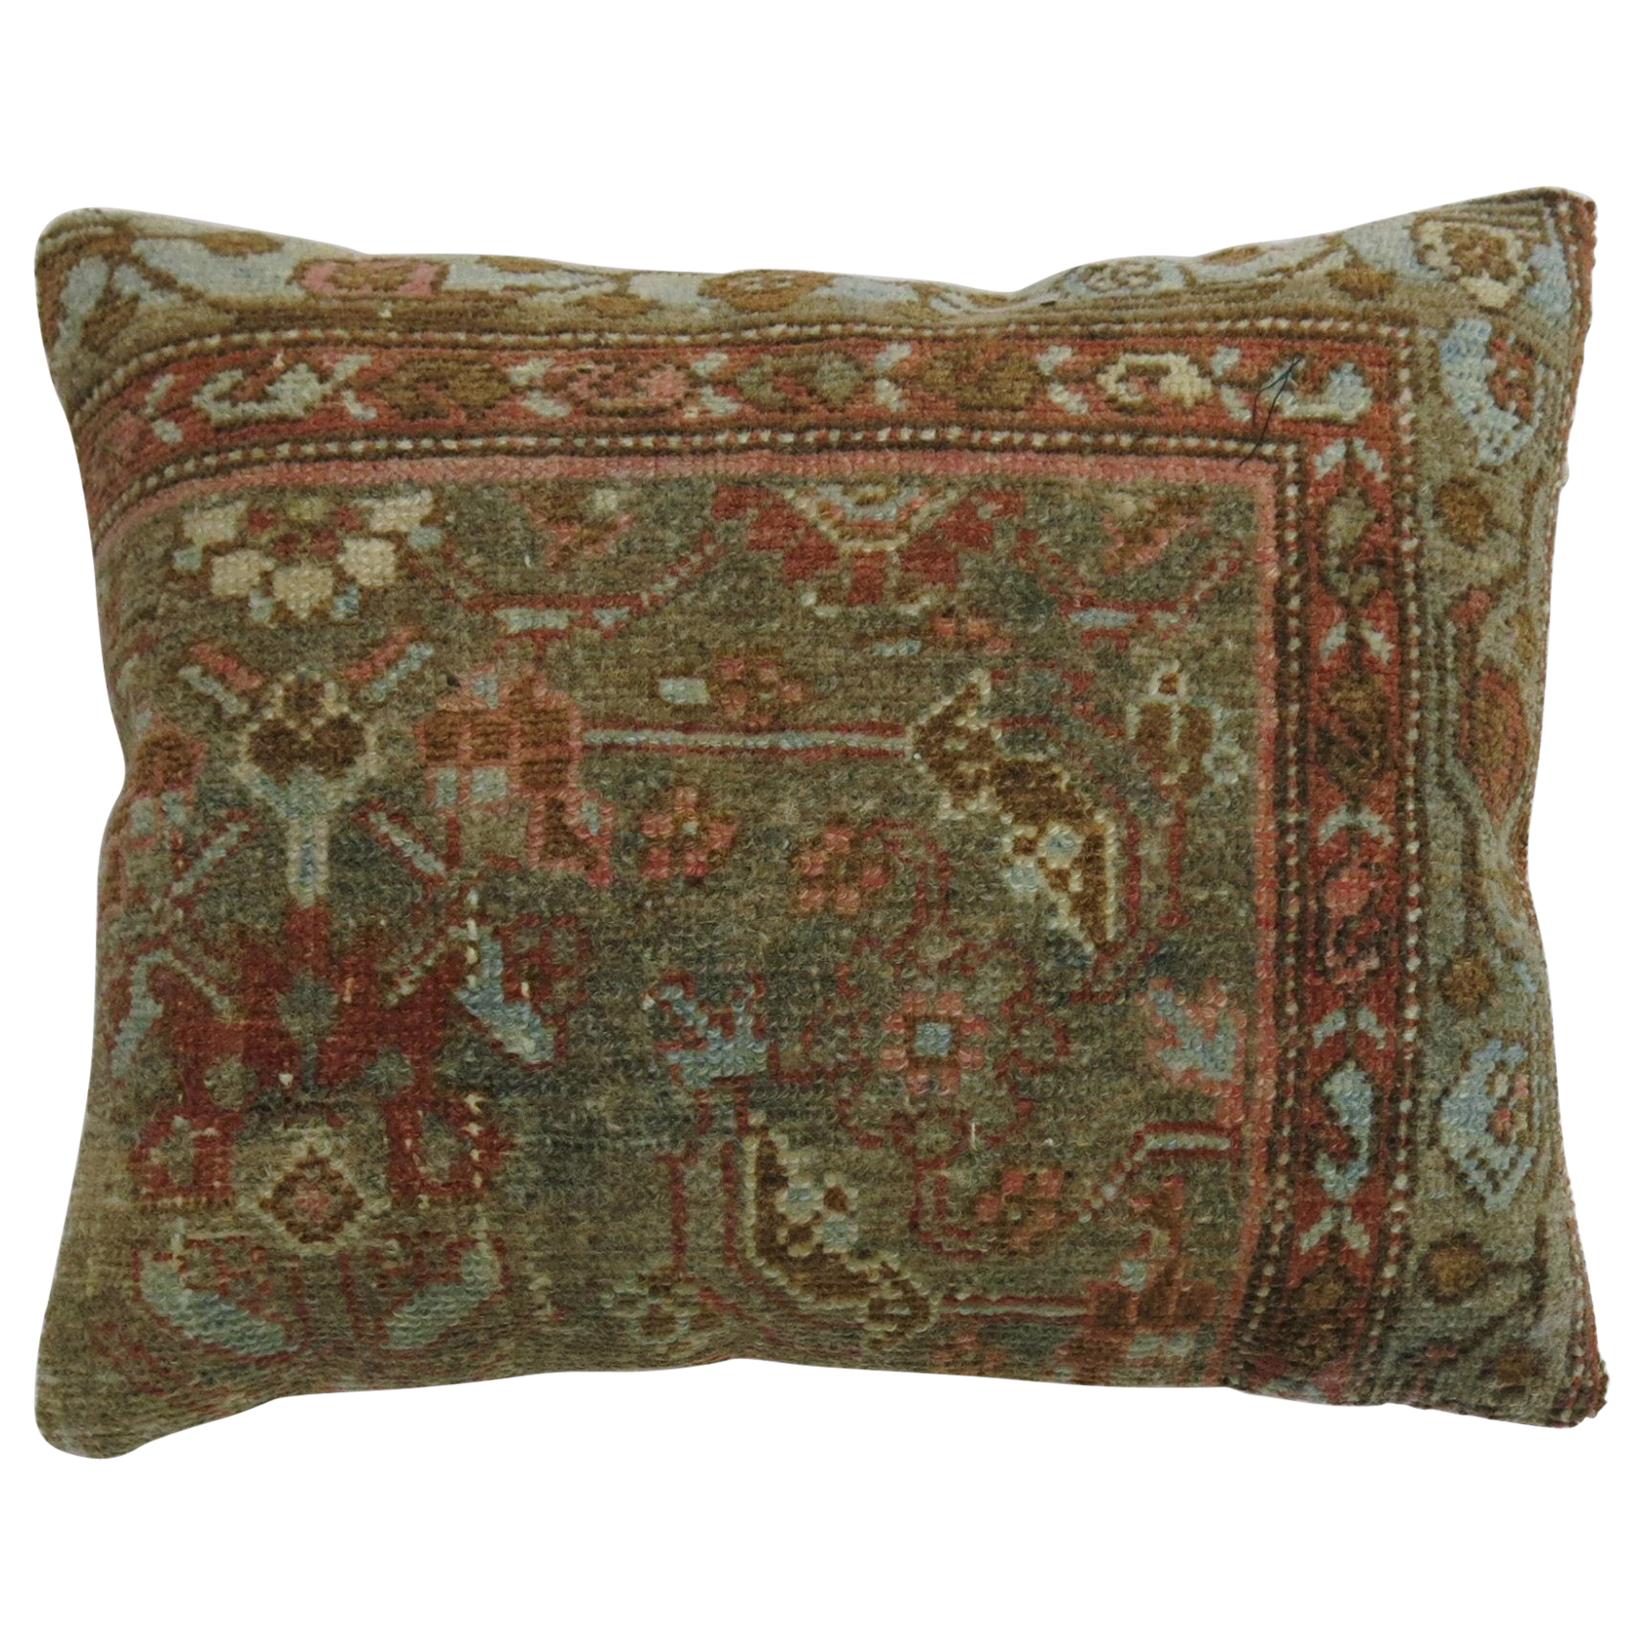 Brown Antique Rug Pillow with Border